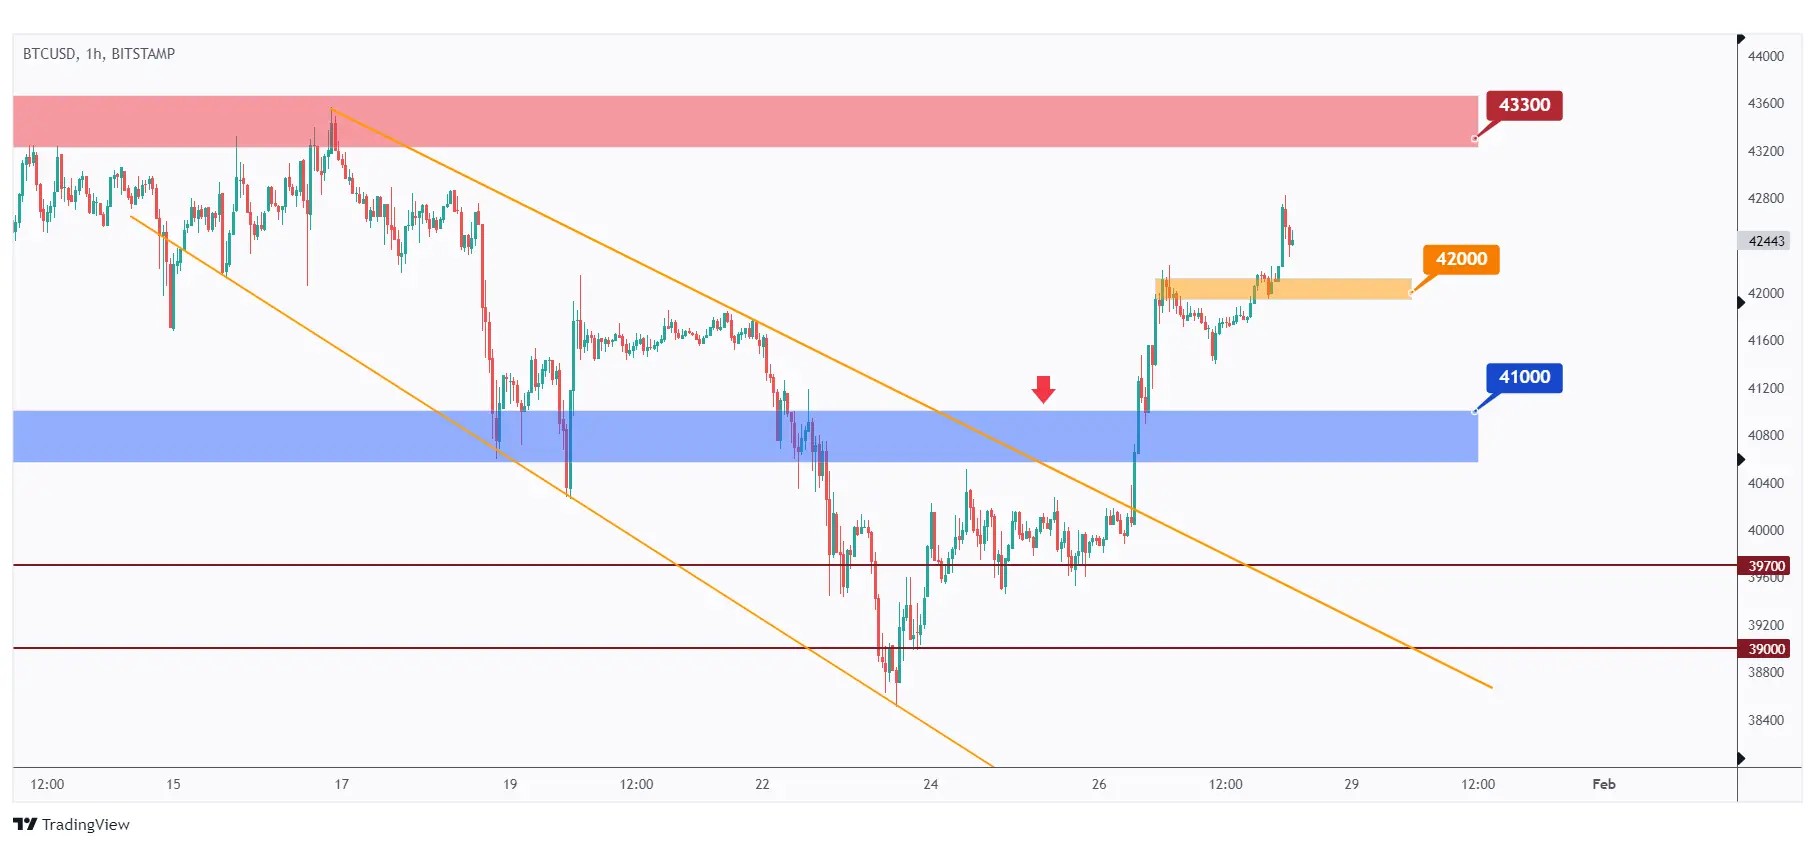 btc 1h chart showing the last major low at $42,000 that we need a break below for the bears to take over.